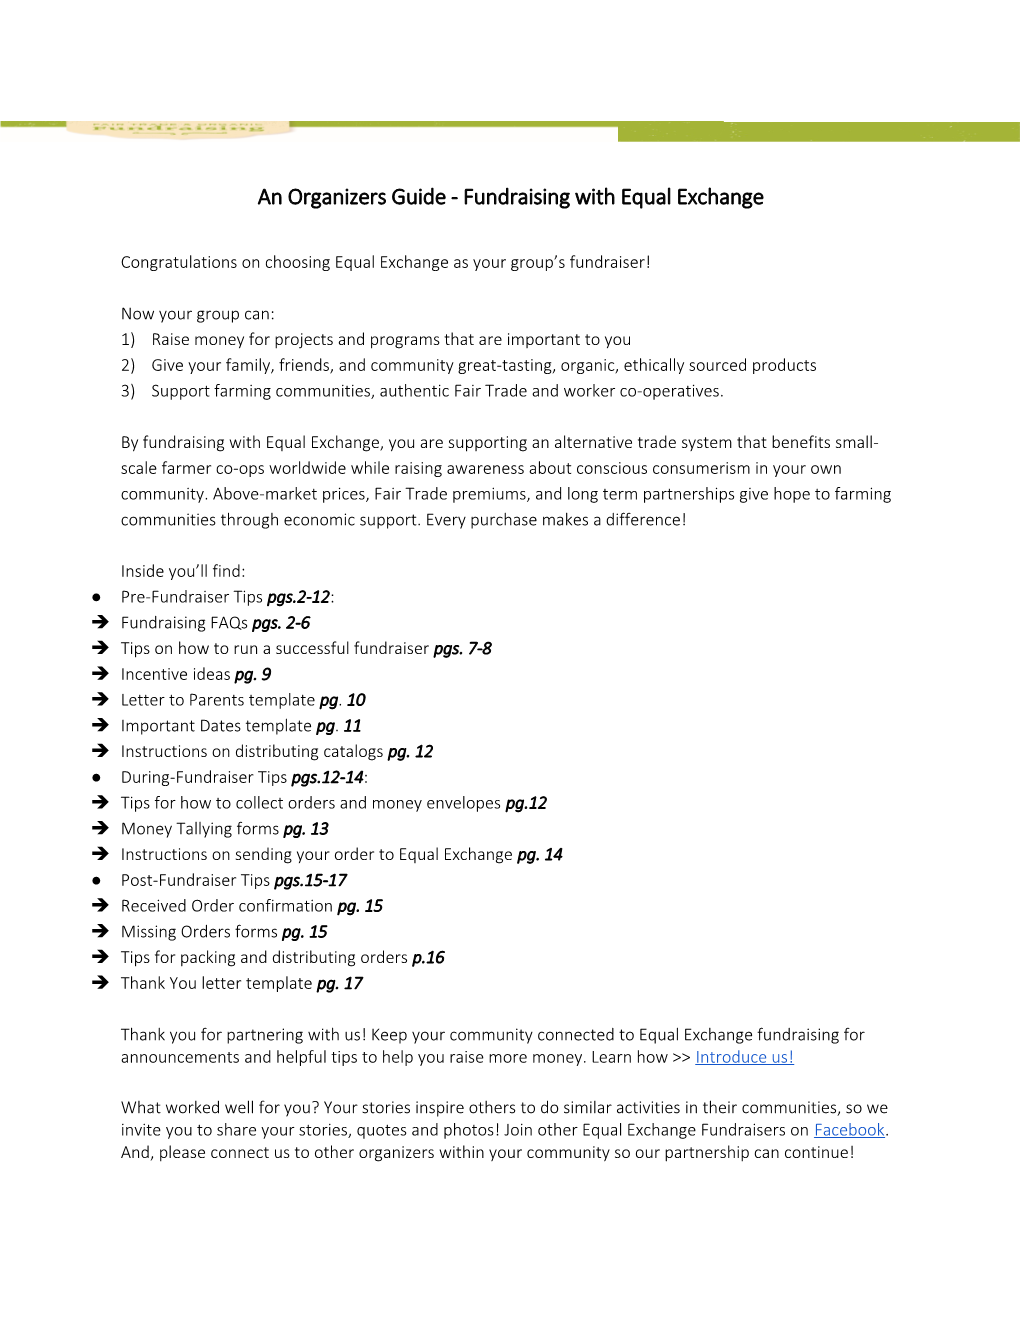 An Organizers Guide - Fundraising with Equal Exchange